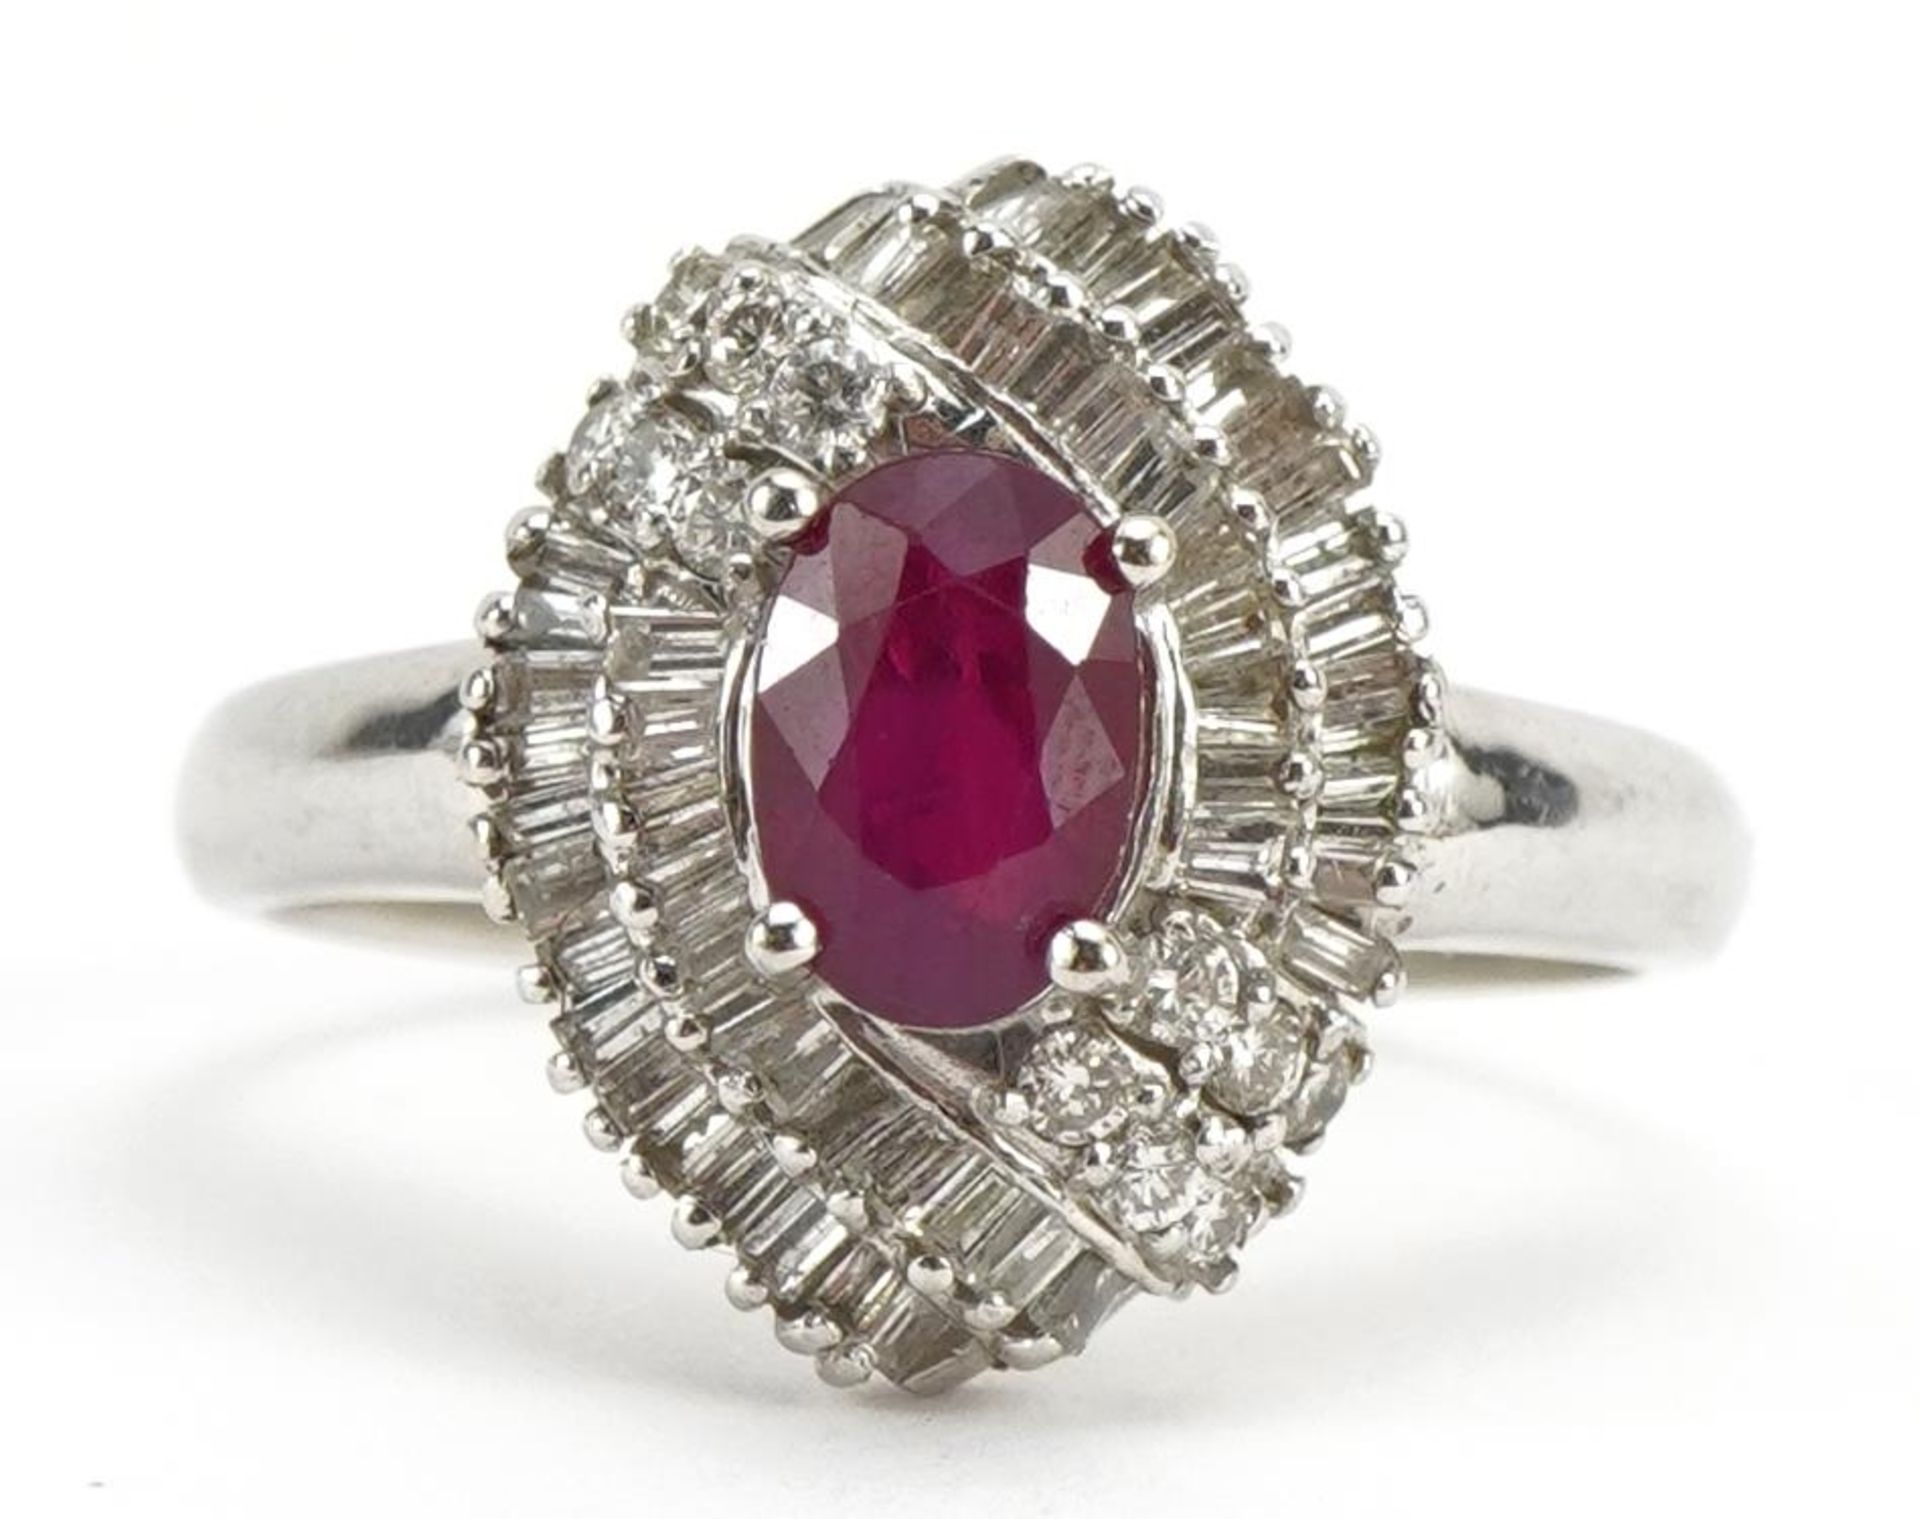 14k white gold ruby and diamond cluster ring, the ruby approximately 6.8mm x 4.7mm, size N, 3.8g :